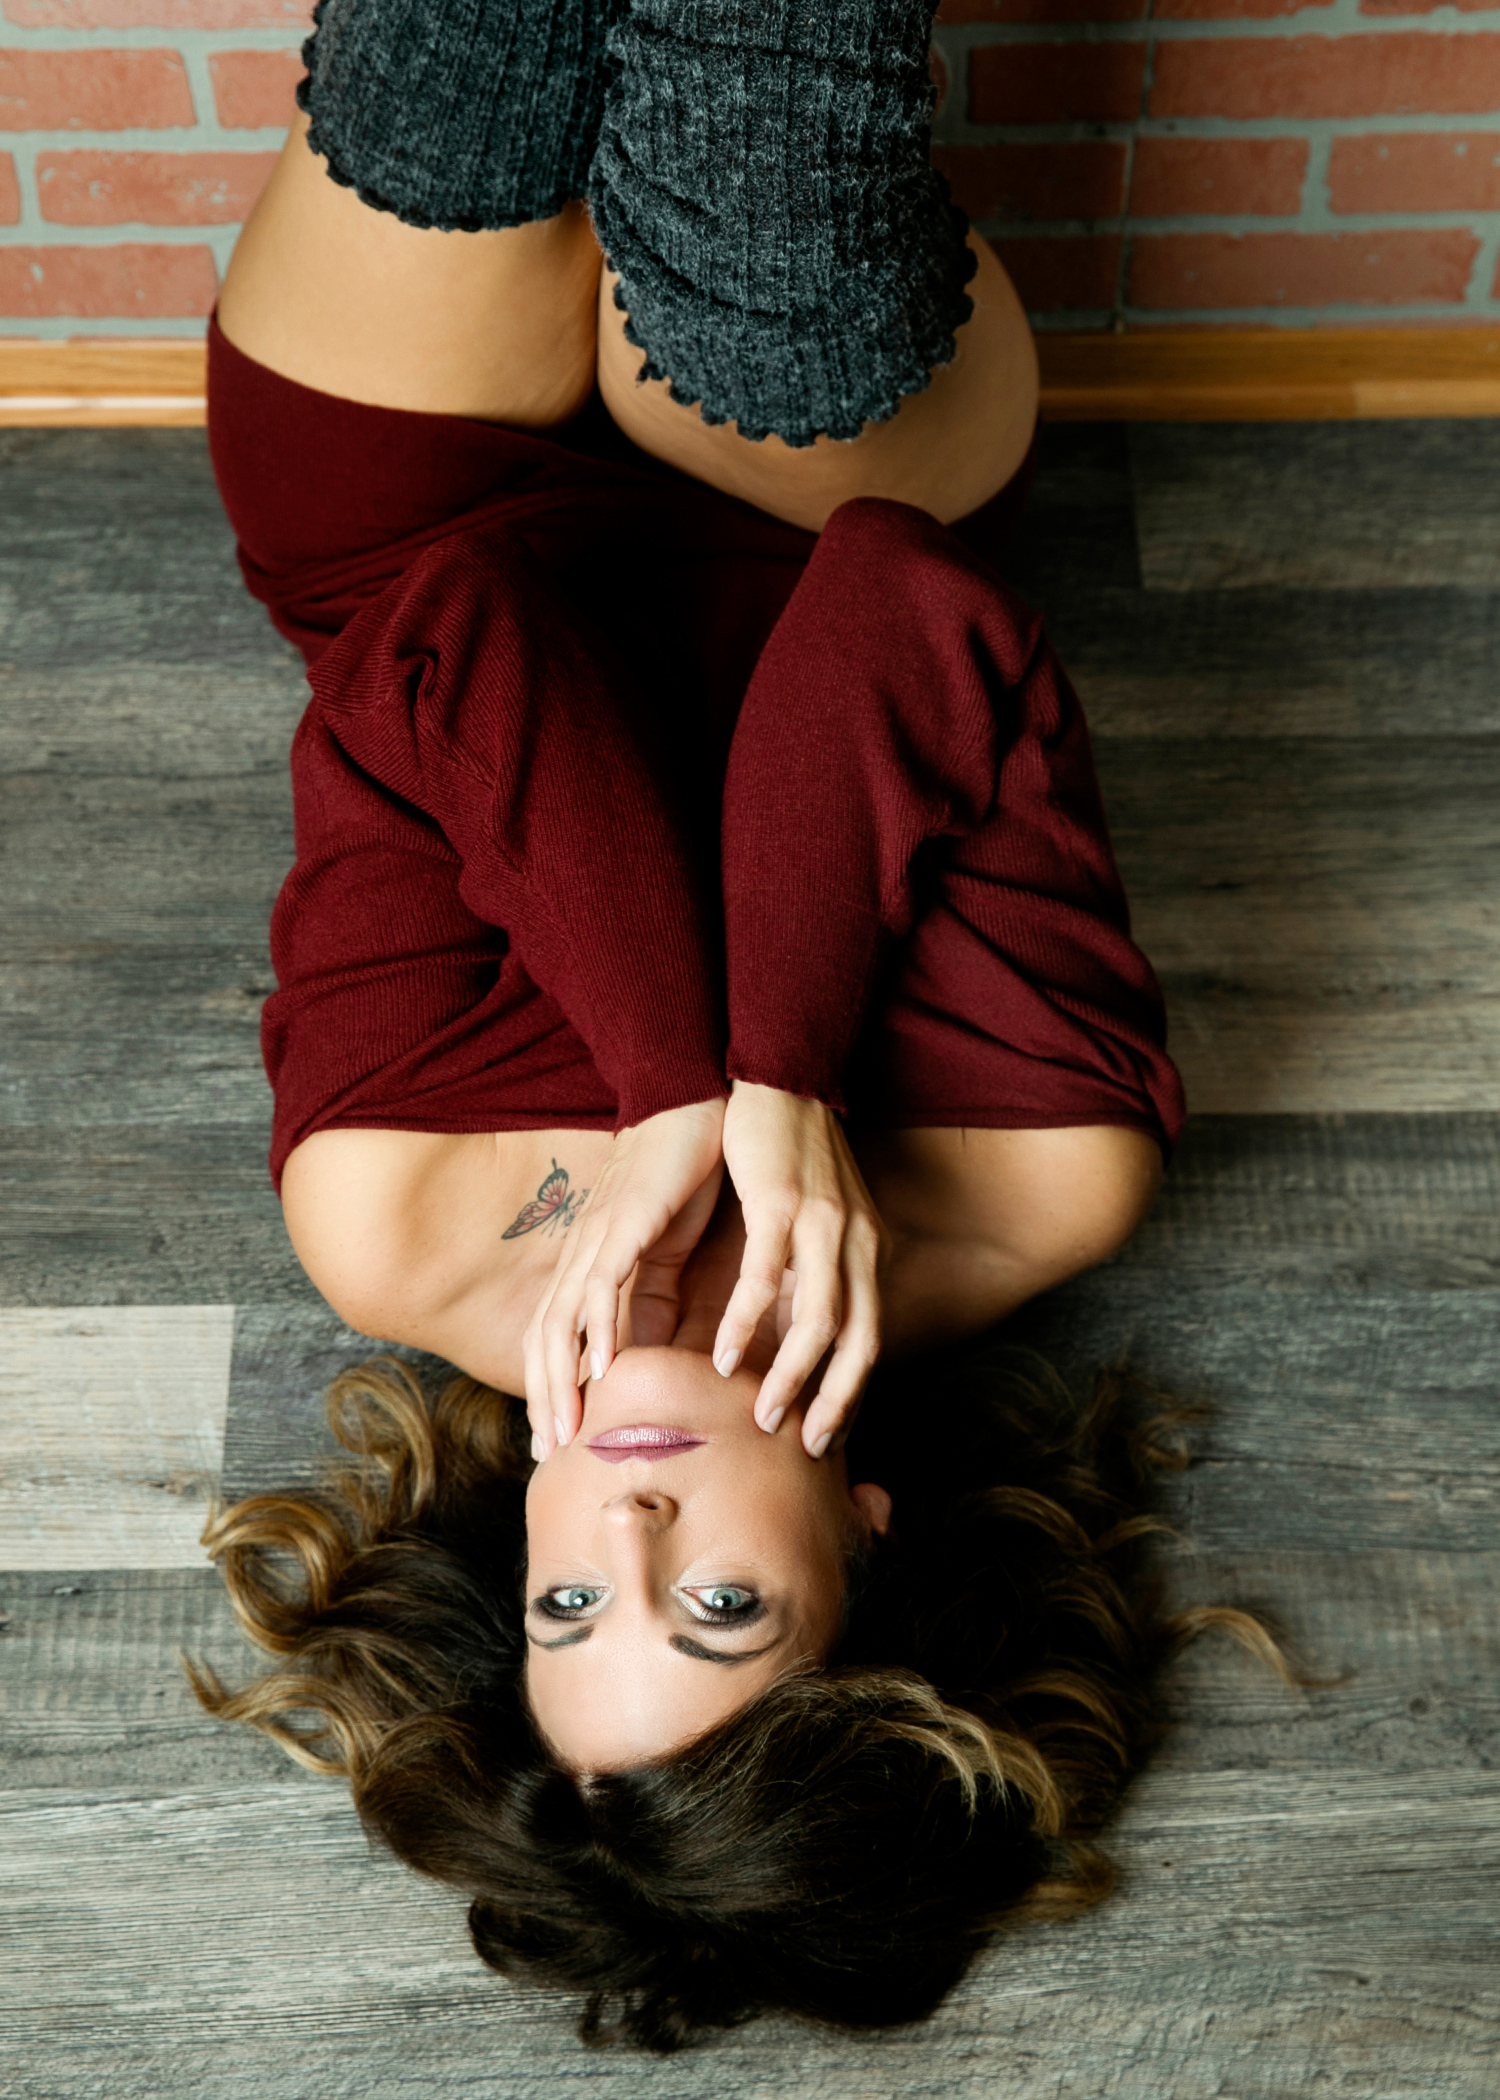 A woman in a maroon sweater lays on the floor with her legs up a brick wall in a studio